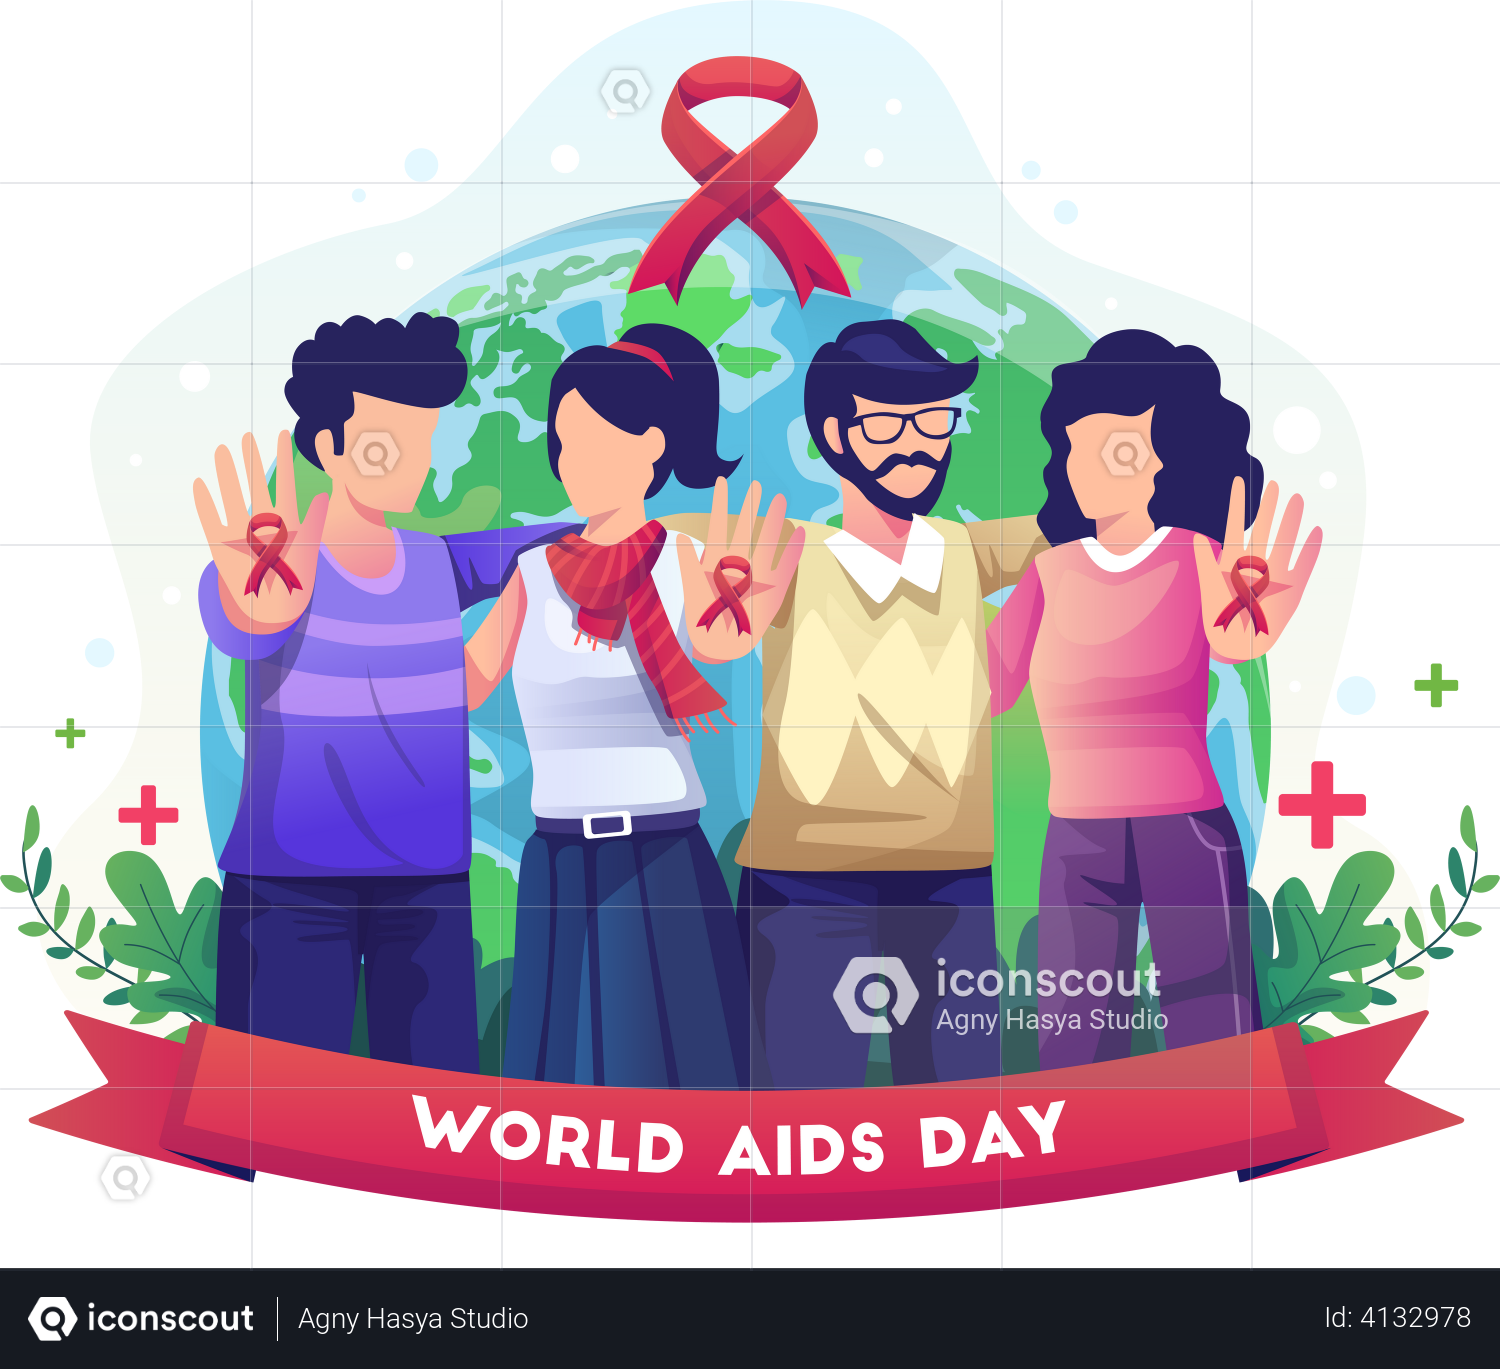 World AIDS Day 2022 : A glimpse into past , present and future - Asiana Times